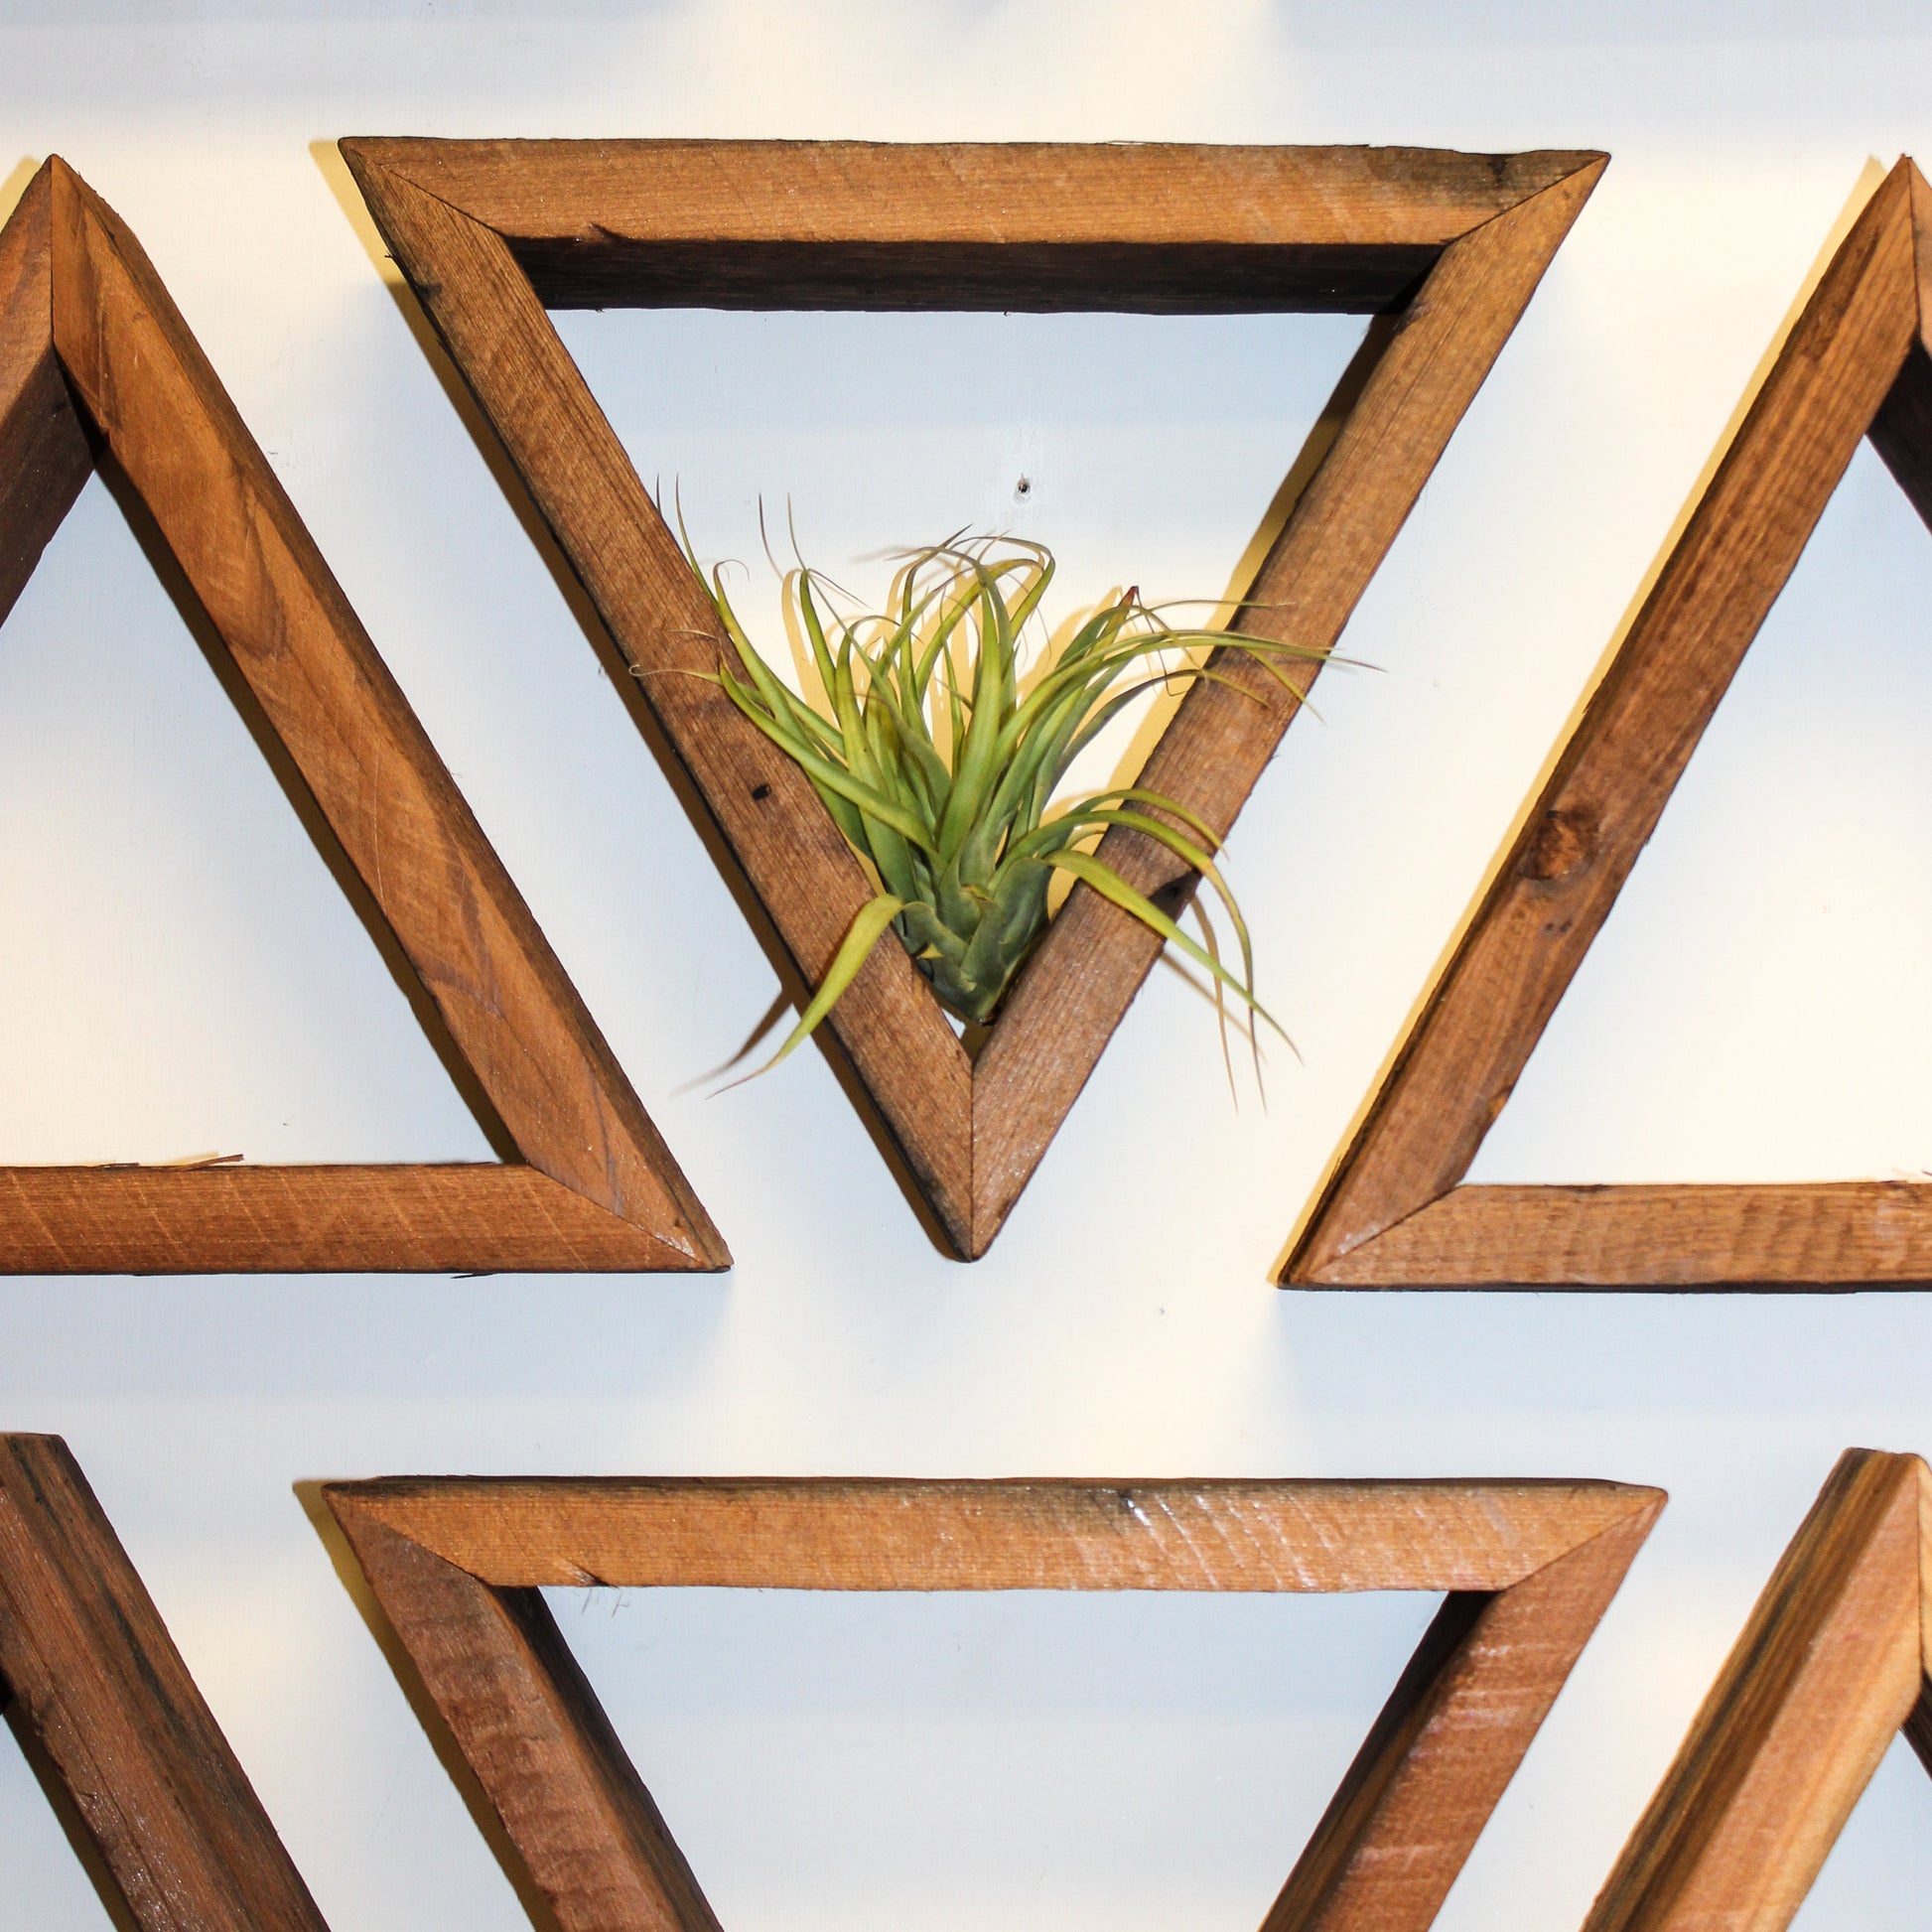 Reclaimed Wood Triangle Wall Shelf with air plant